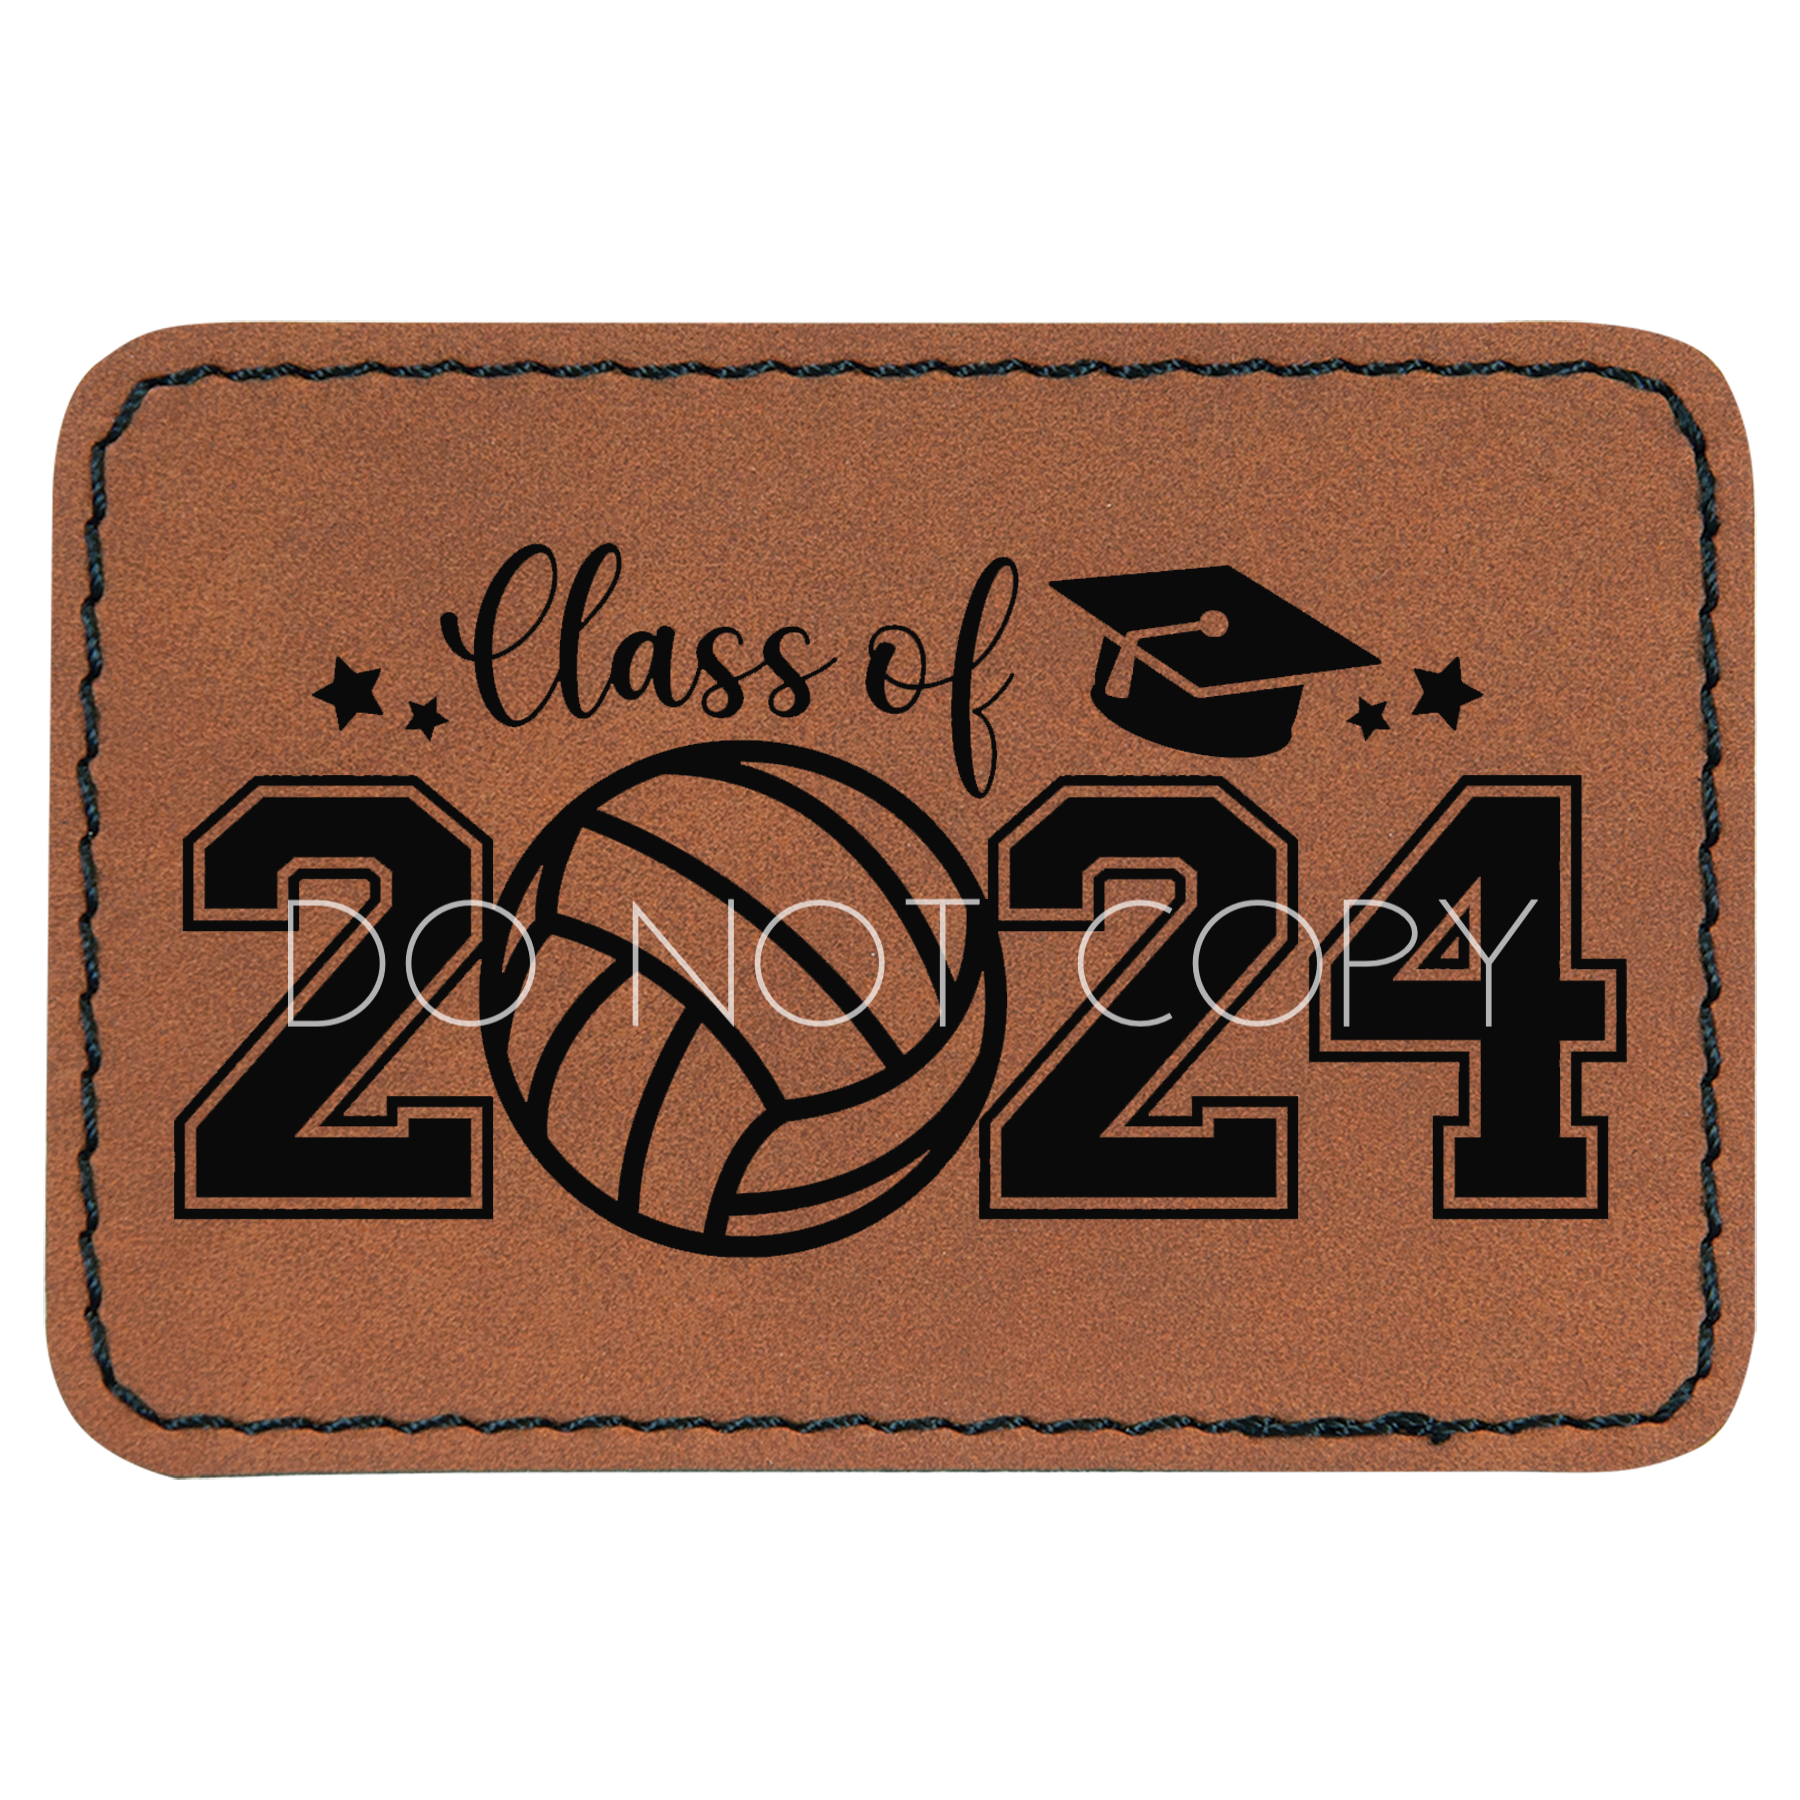 Class of 2024 Volleyball Patch